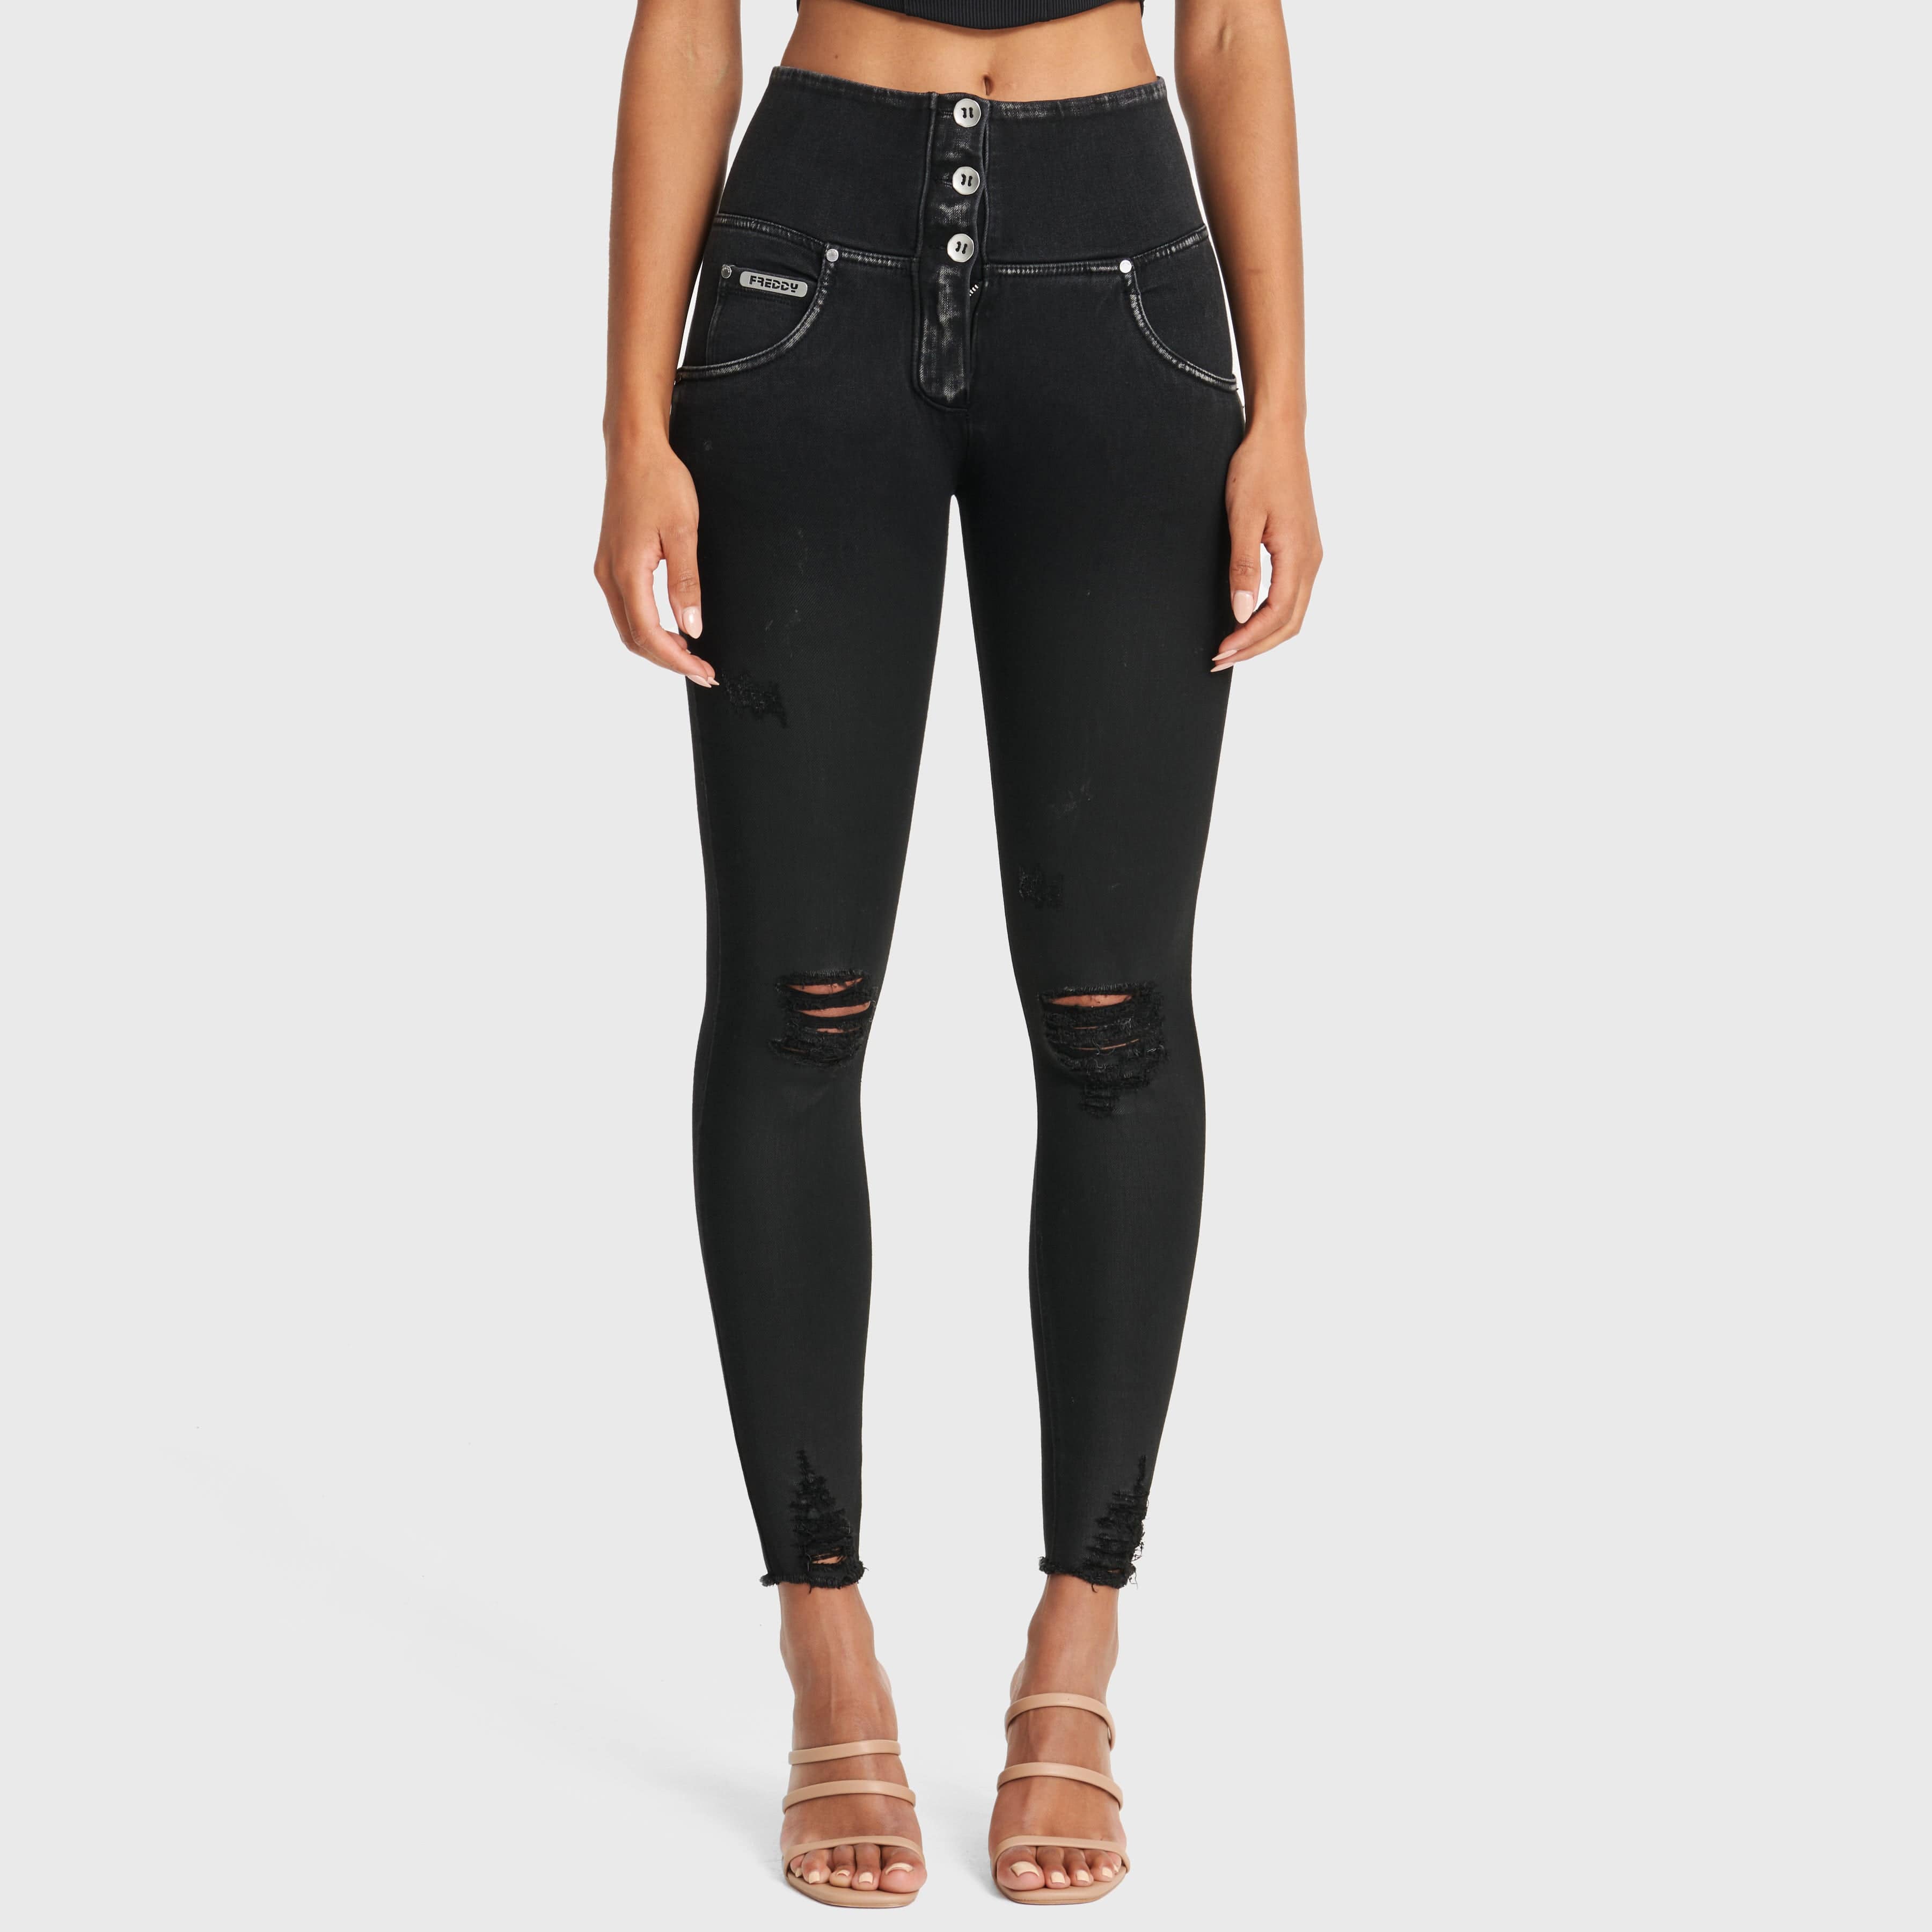 WR.UP® Snug Ripped Jeans - High Waisted - Full Length - Coated Black + Black Stitching 1